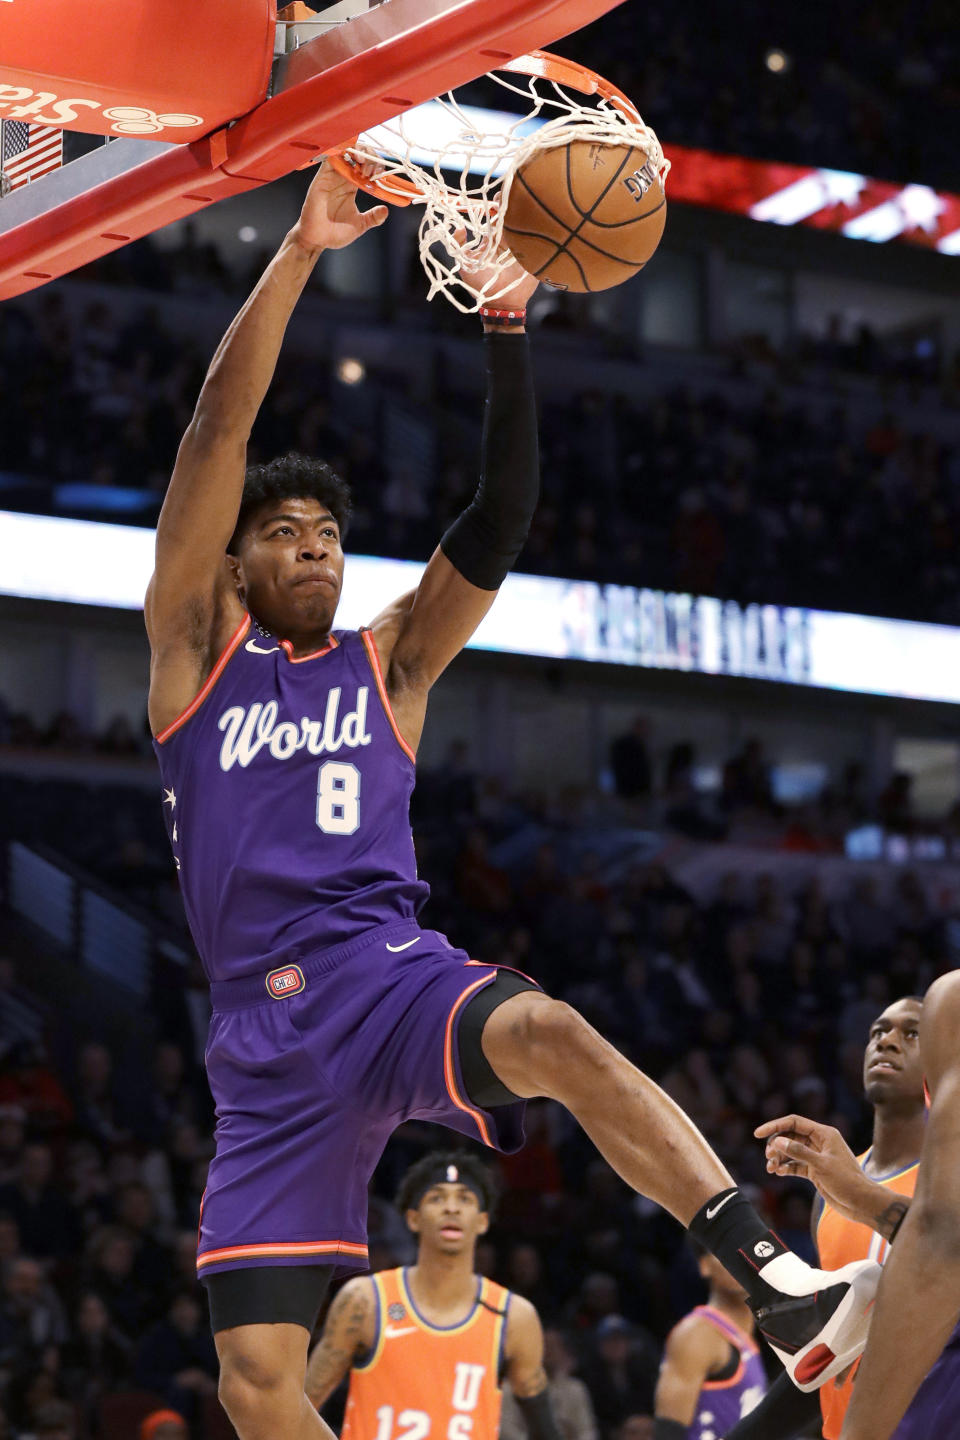 World forward Rui Hachimura, of the Washington Wizards, dunks against the United States during the first half of the NBA Rising Stars basketball game in Chicago, Friday, Feb. 14, 2020. (AP Photo/Nam Y. Huh)